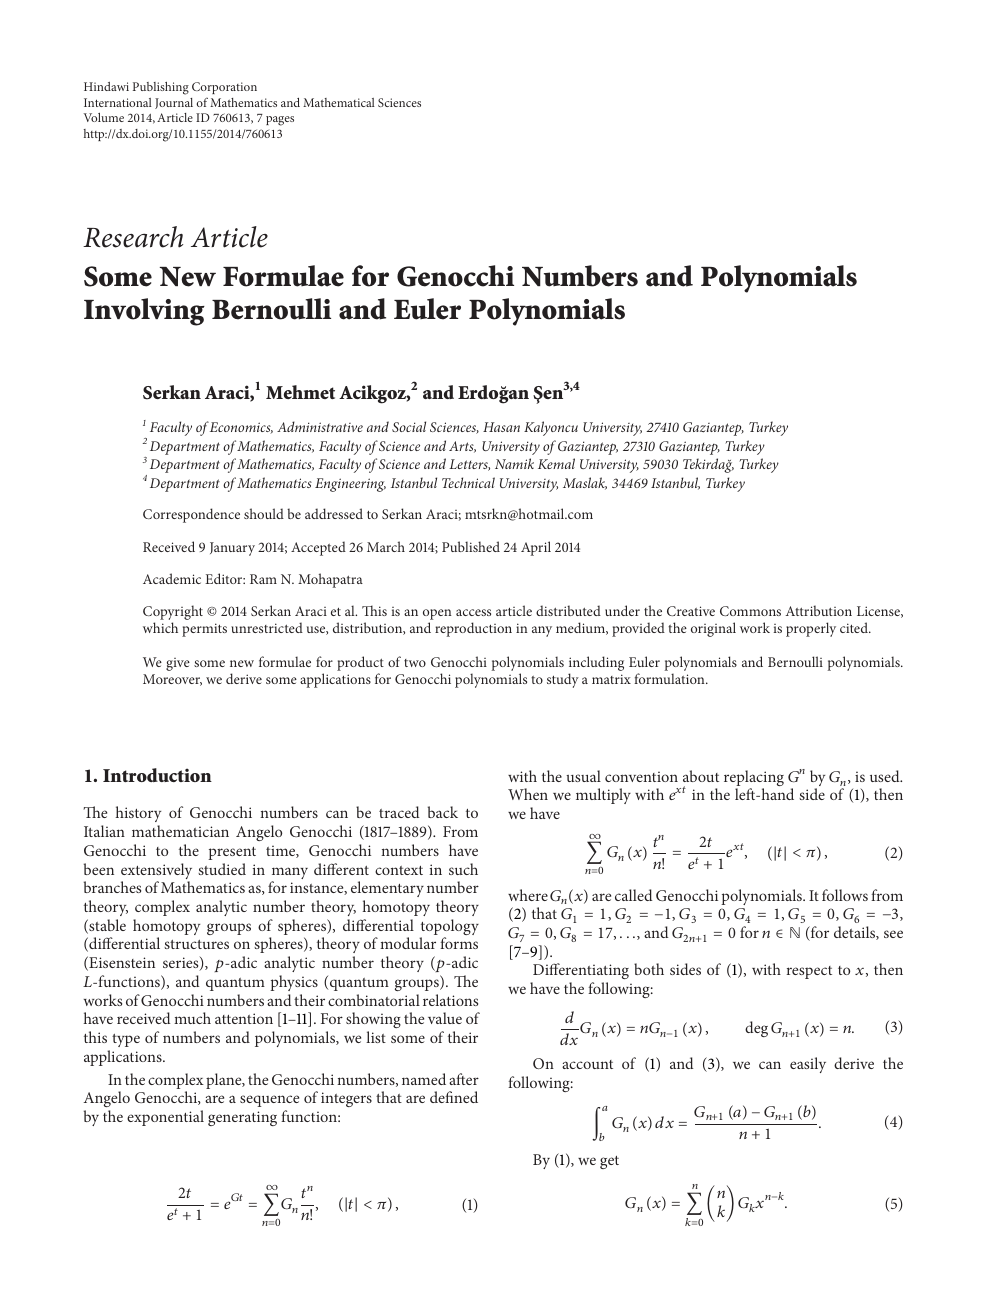 Some New Formulae For Genocchi Numbers And Polynomials Involving Bernoulli And Euler Polynomials Topic Of Research Paper In Mathematics Download Scholarly Article Pdf And Read For Free On Cyberleninka Open Science